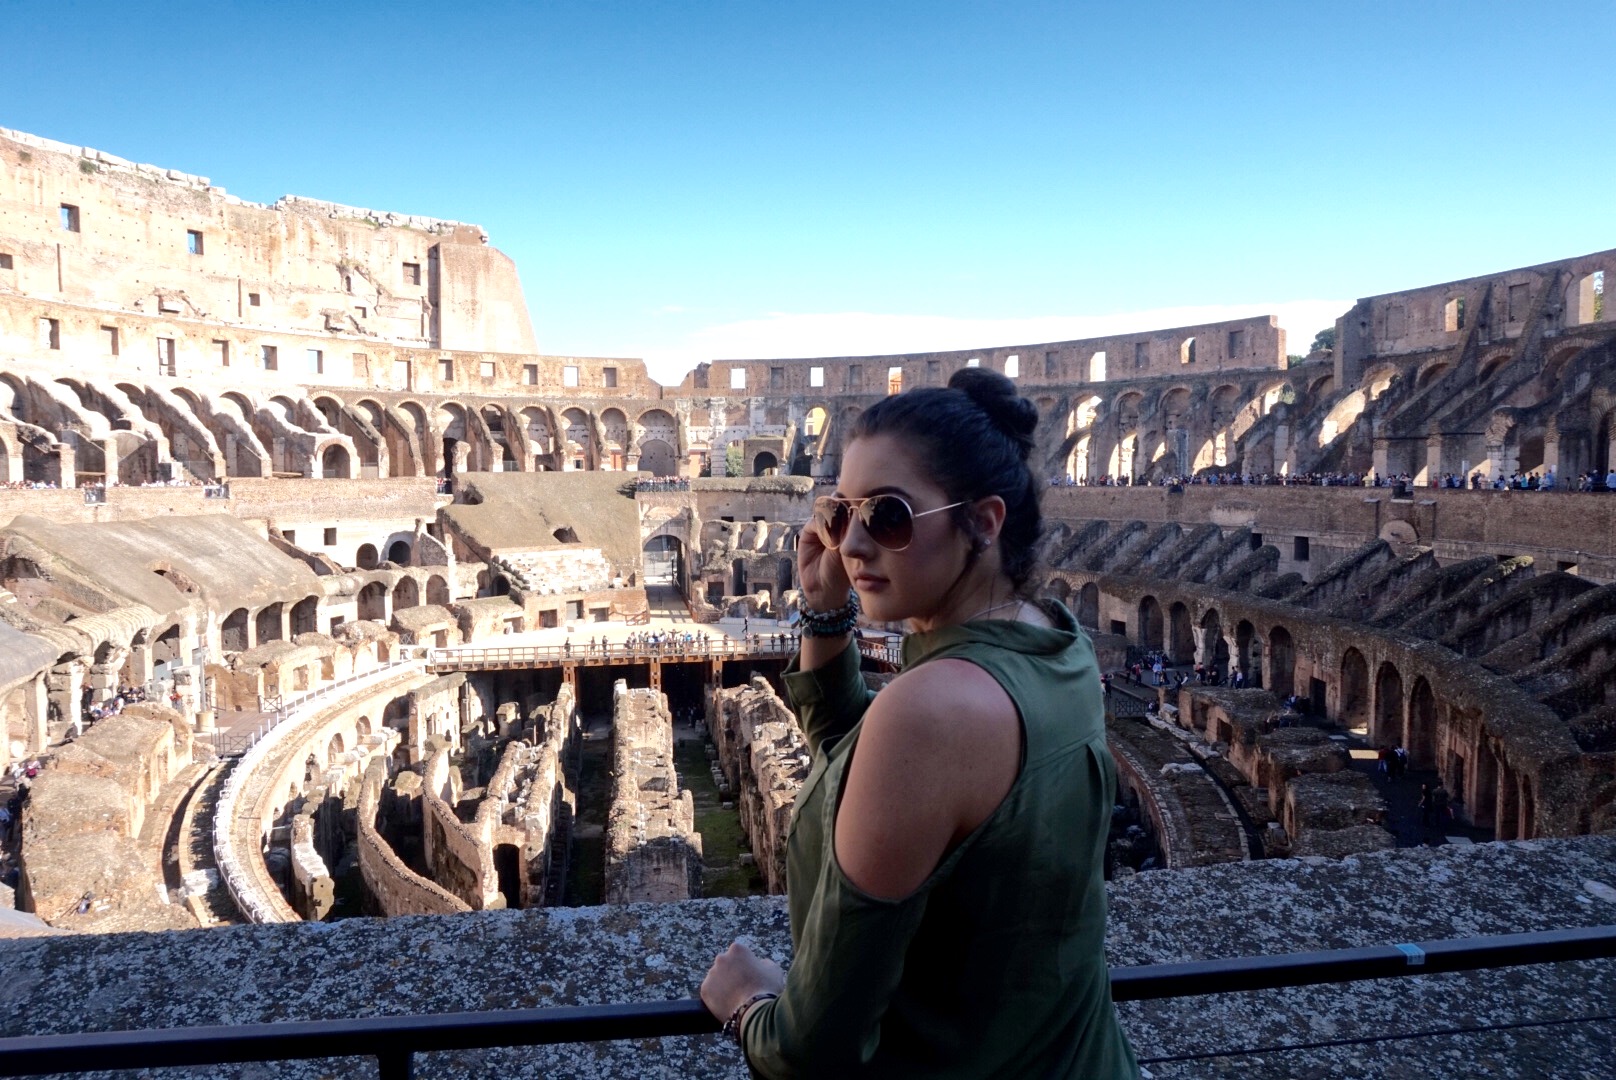 AIFS Abroad student in Rome, Italy at the Colosseum